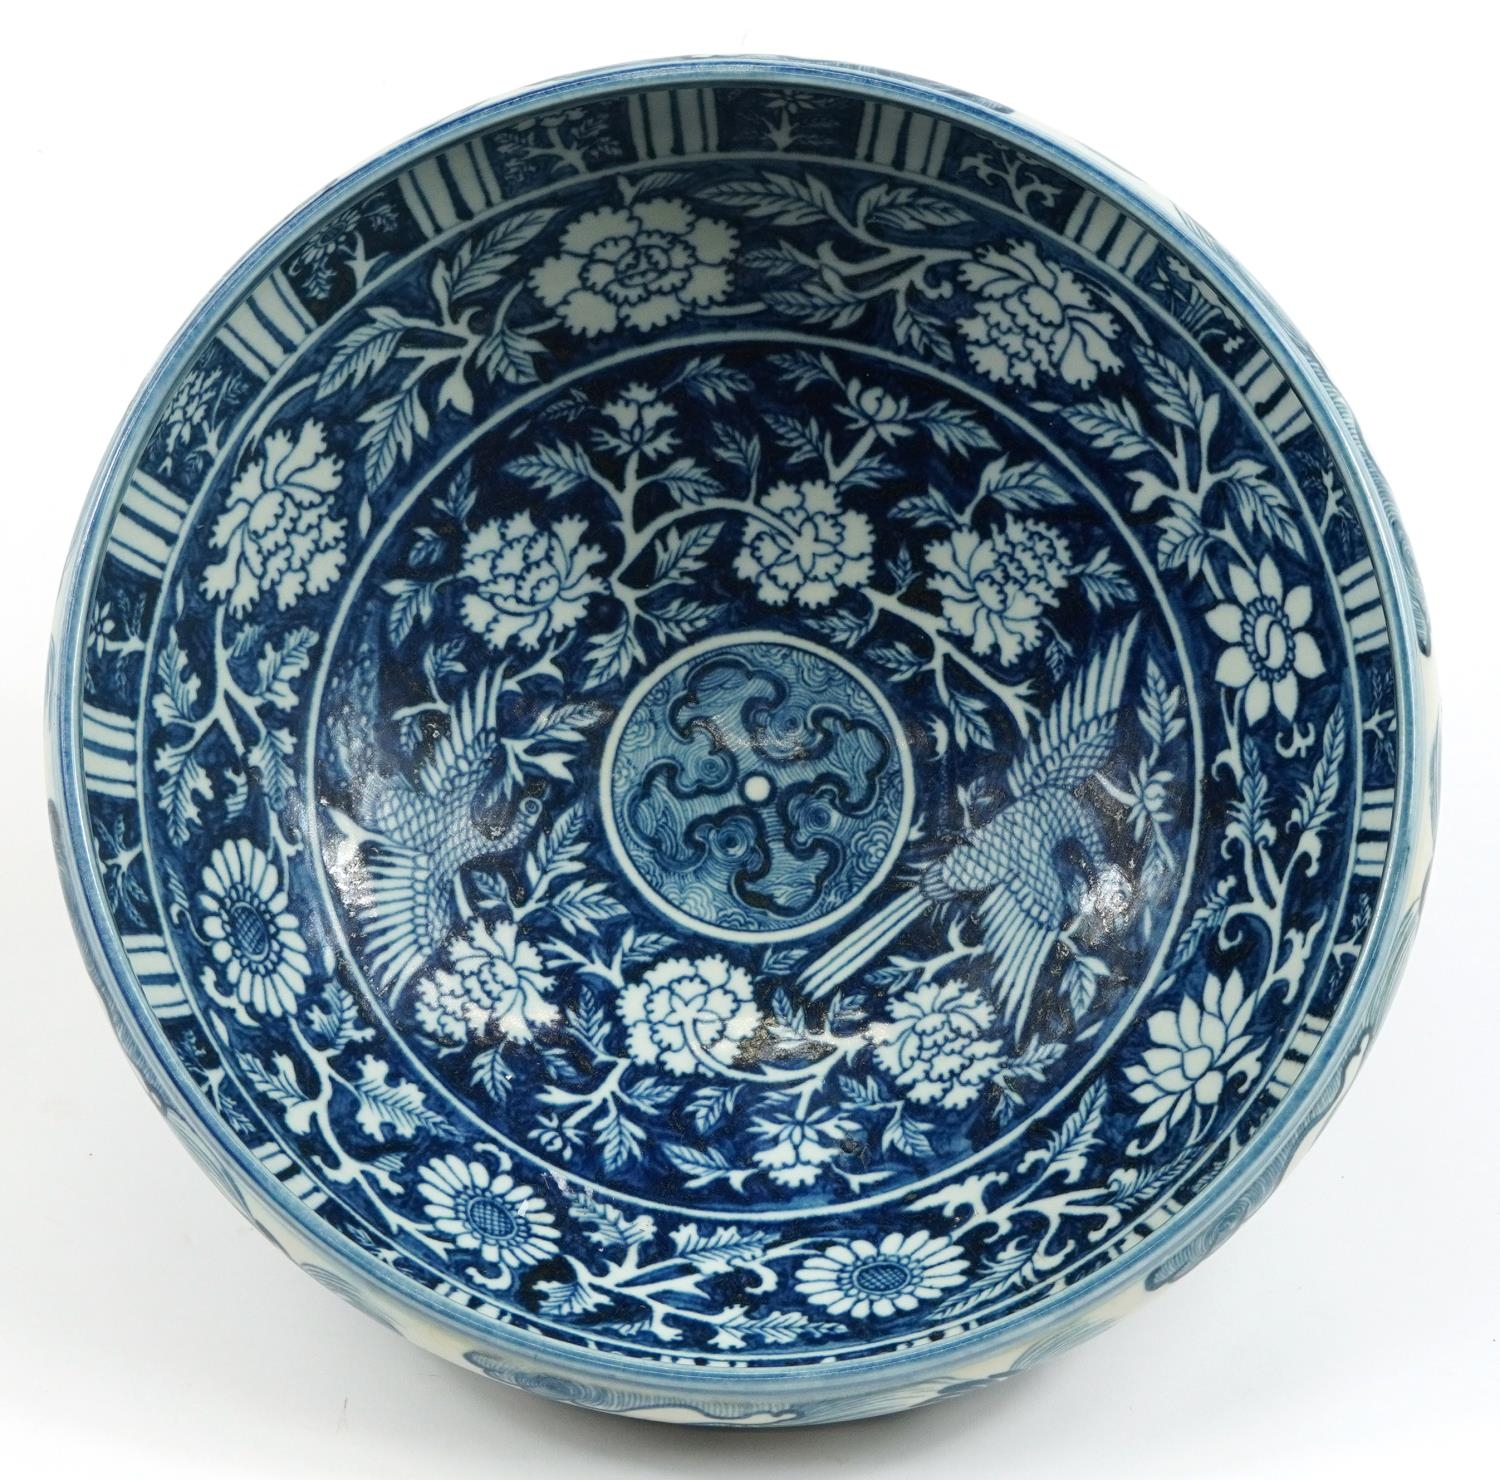 Very large Chinese Islamic blue and white porcelain footed bowl hand painted with phoenixes - Image 3 of 5